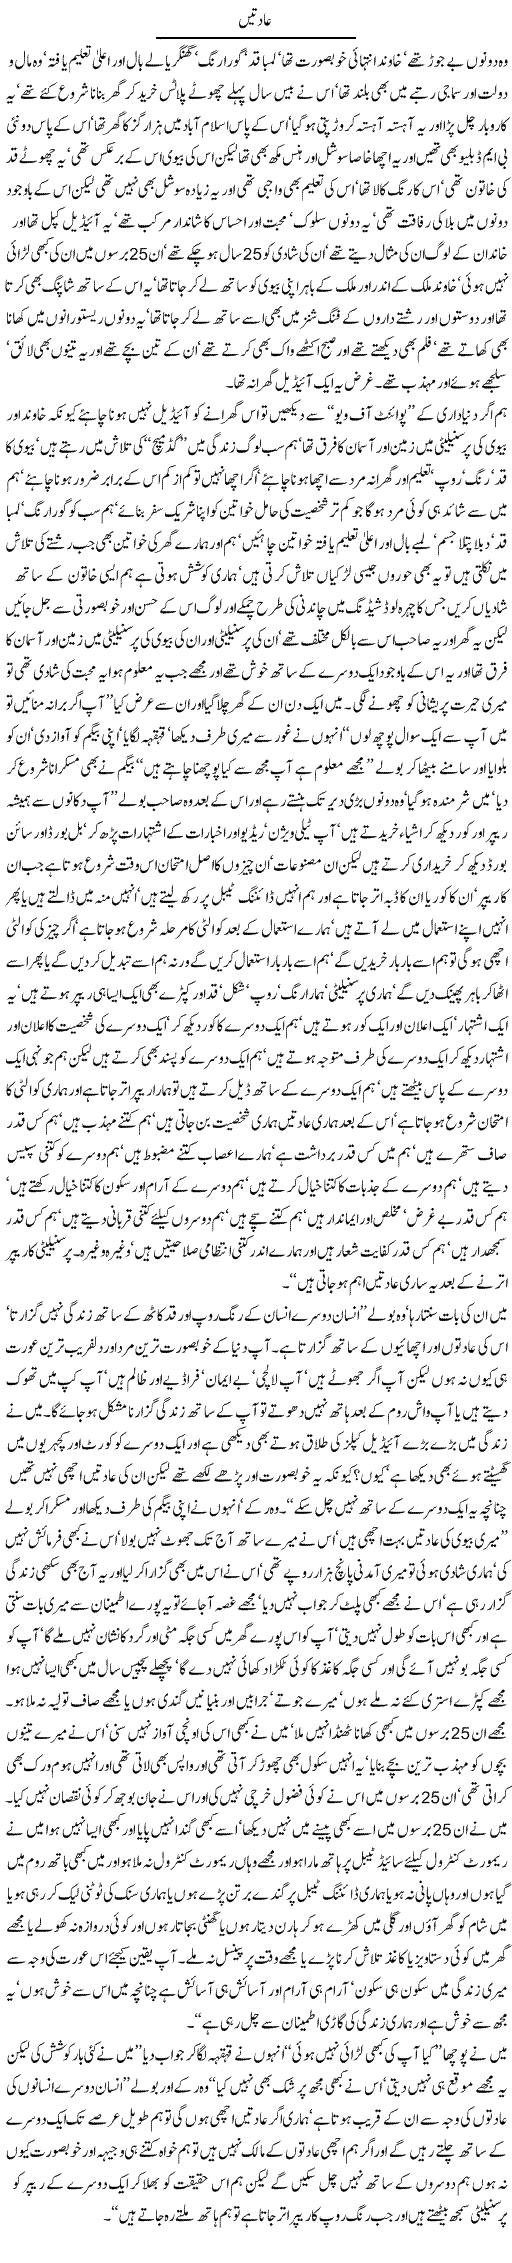 A Couple Express Column Javed Chaudhry 26 June 2011